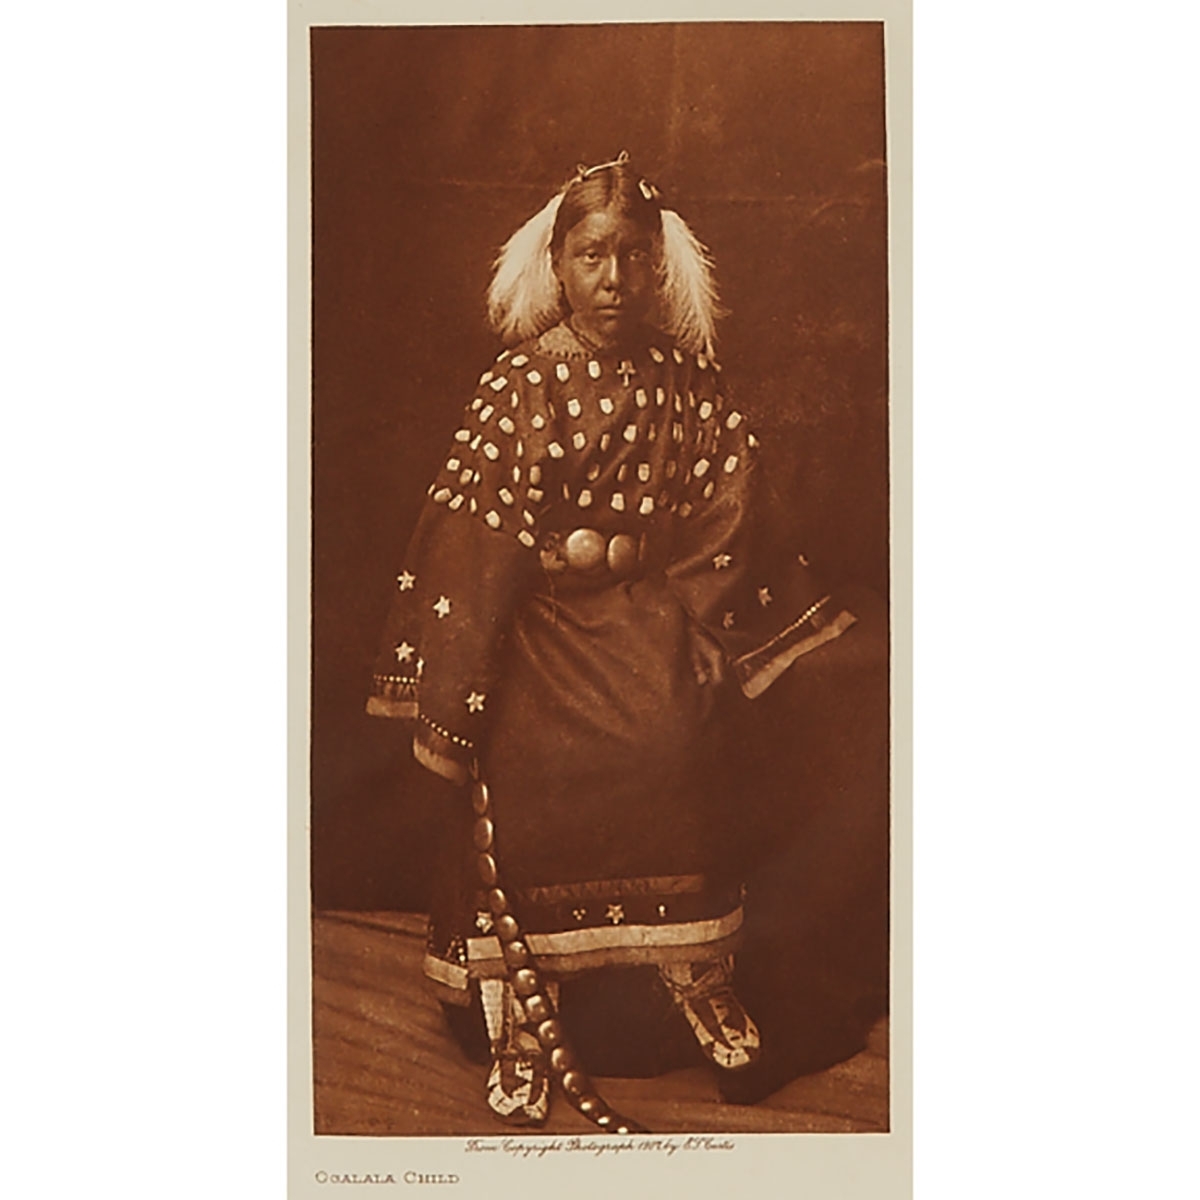 3 Works: FROM "THE NORTH AMERICAN INDIAN"; OGALALA CHILD; ELK HEAD, AND THE SACRED PIPE BUNDLE by Edward S. Curtis, 1907